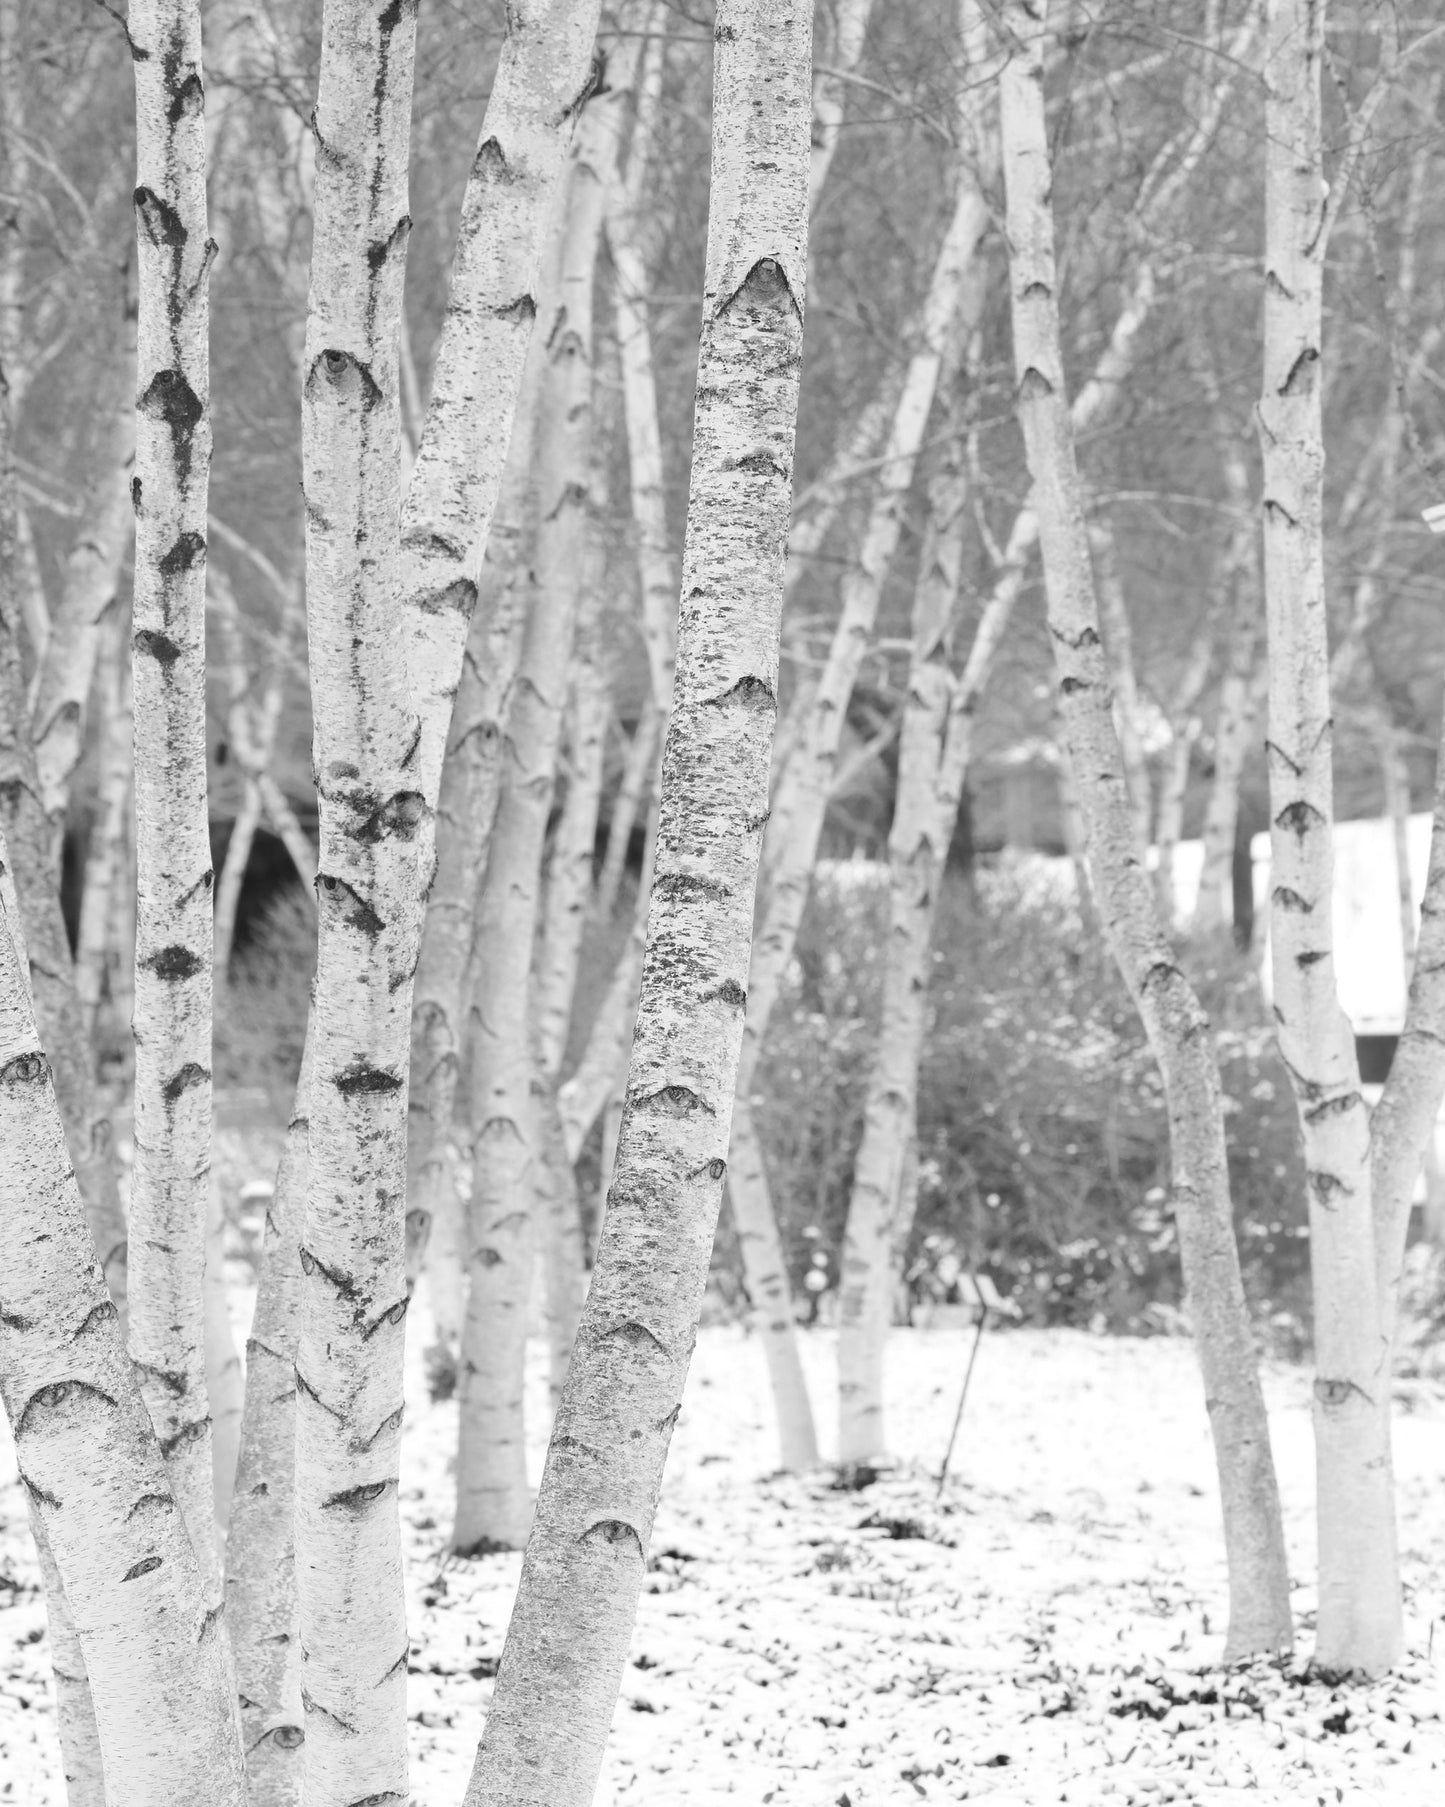 VERTICAL Birch Trees wall art, black and white birch tree print, winter art, birch tree woods photo, large canvas wall decor 5x7 to 32x48"